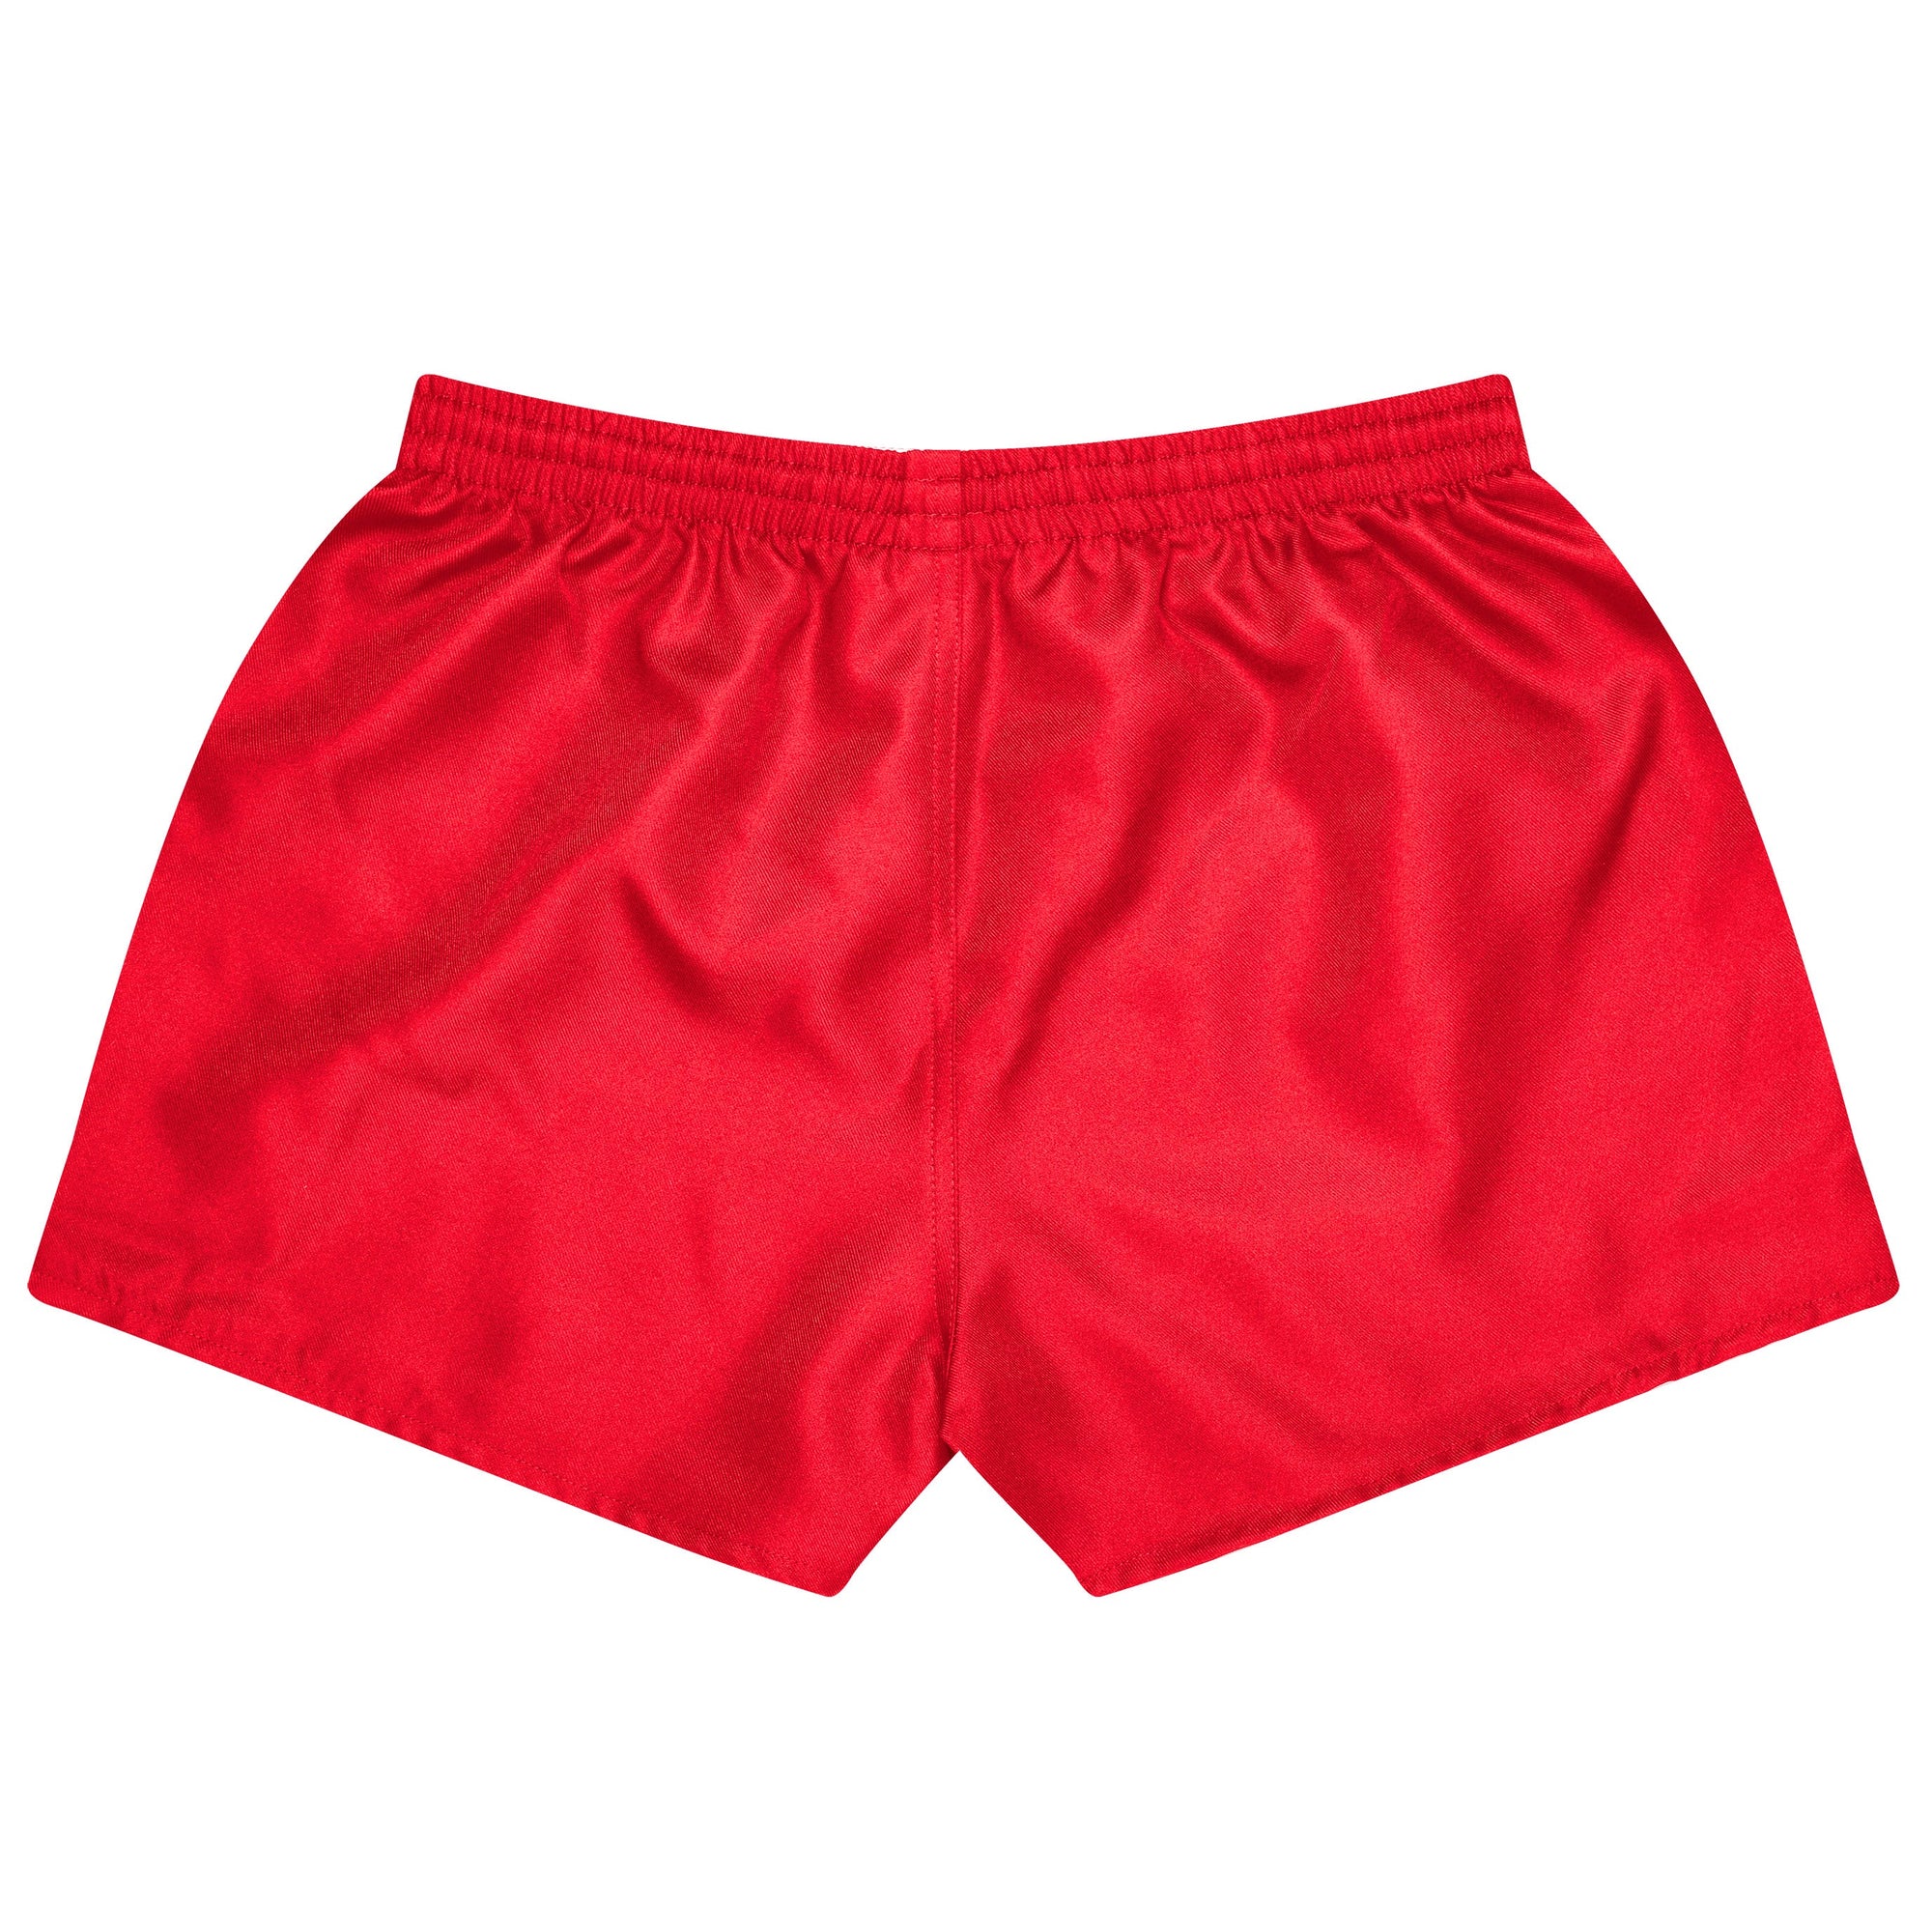 Rugby Shorts | Kids Work Shorts🔥 Safe-T-Rex - red